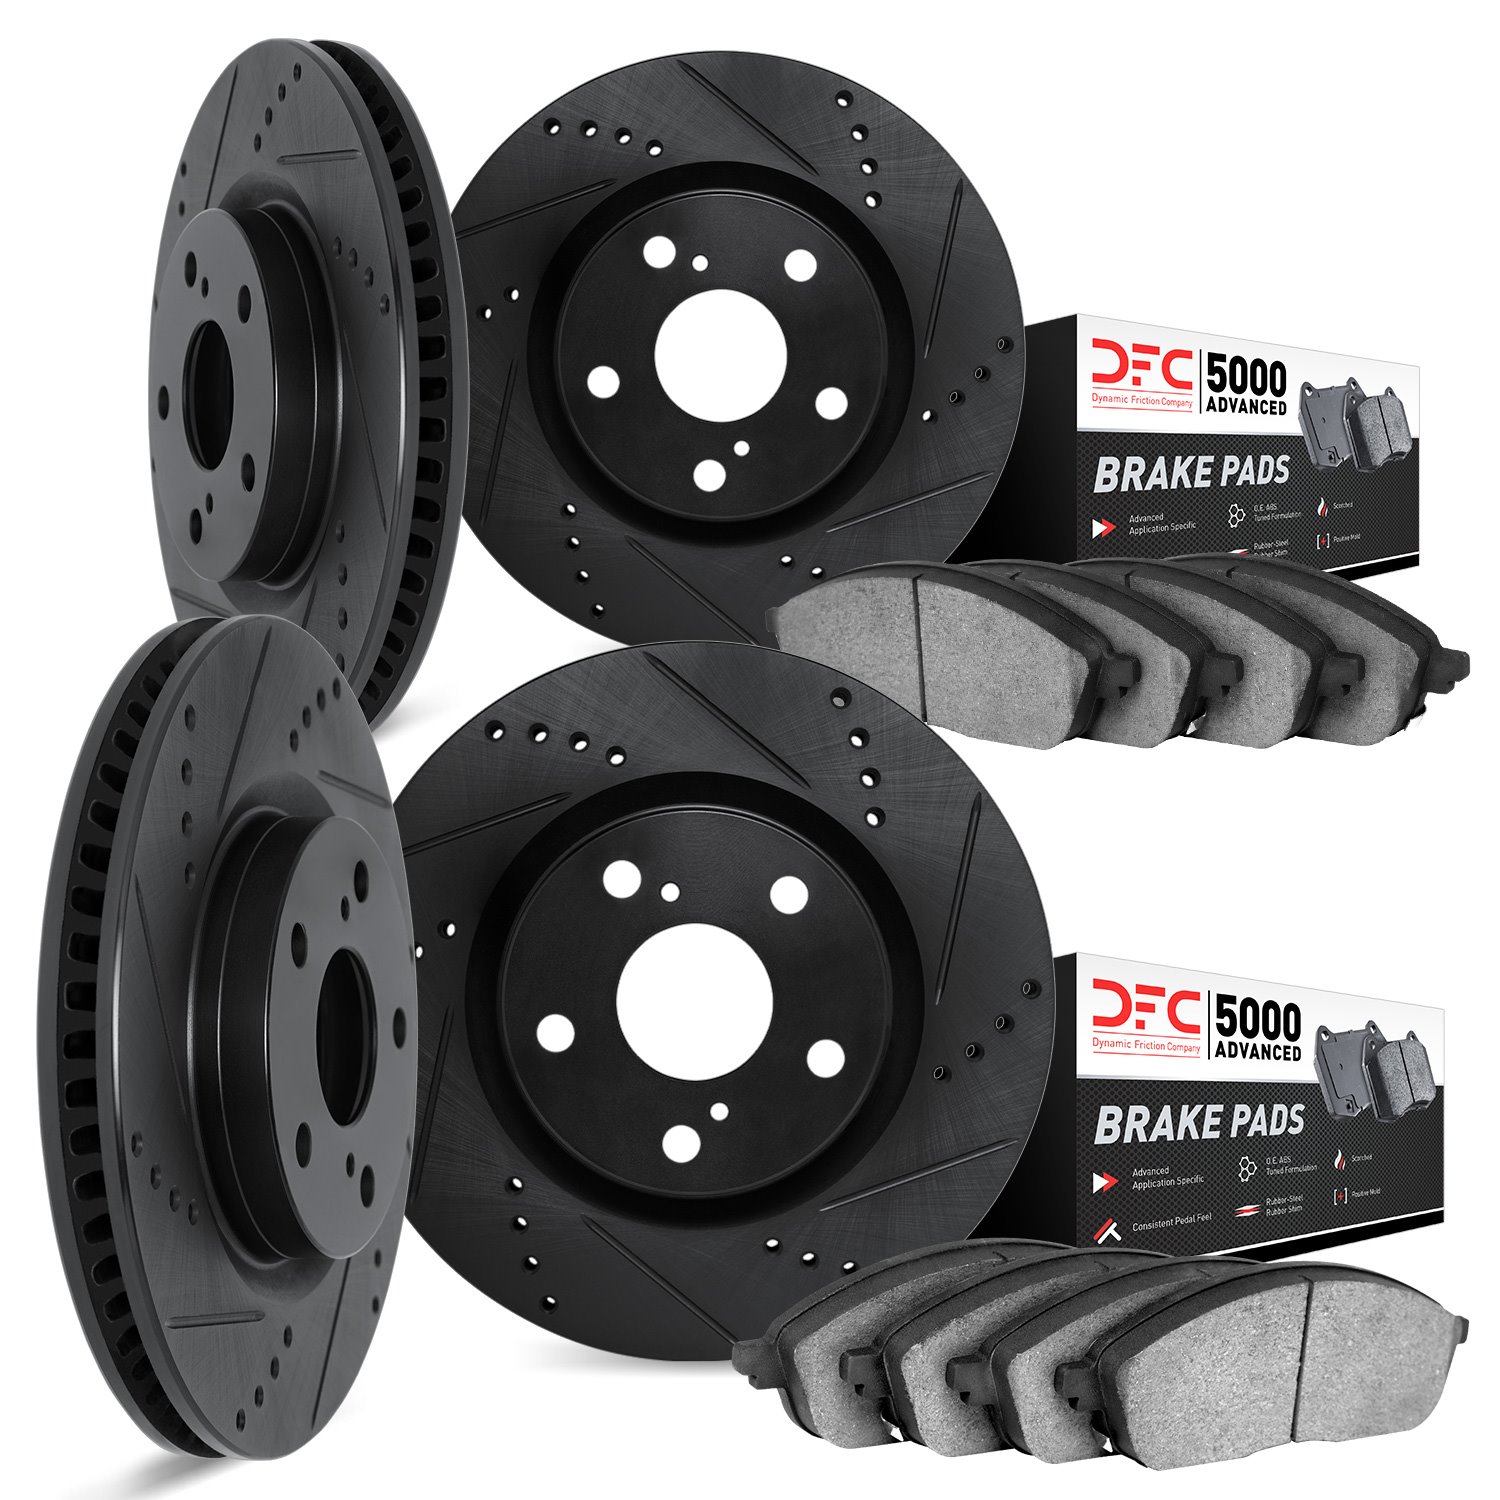 8504-02007 Drilled/Slotted Brake Rotors w/5000 Advanced Brake Pads Kit [Black], 1984-1989 Porsche, Position: Front and Rear